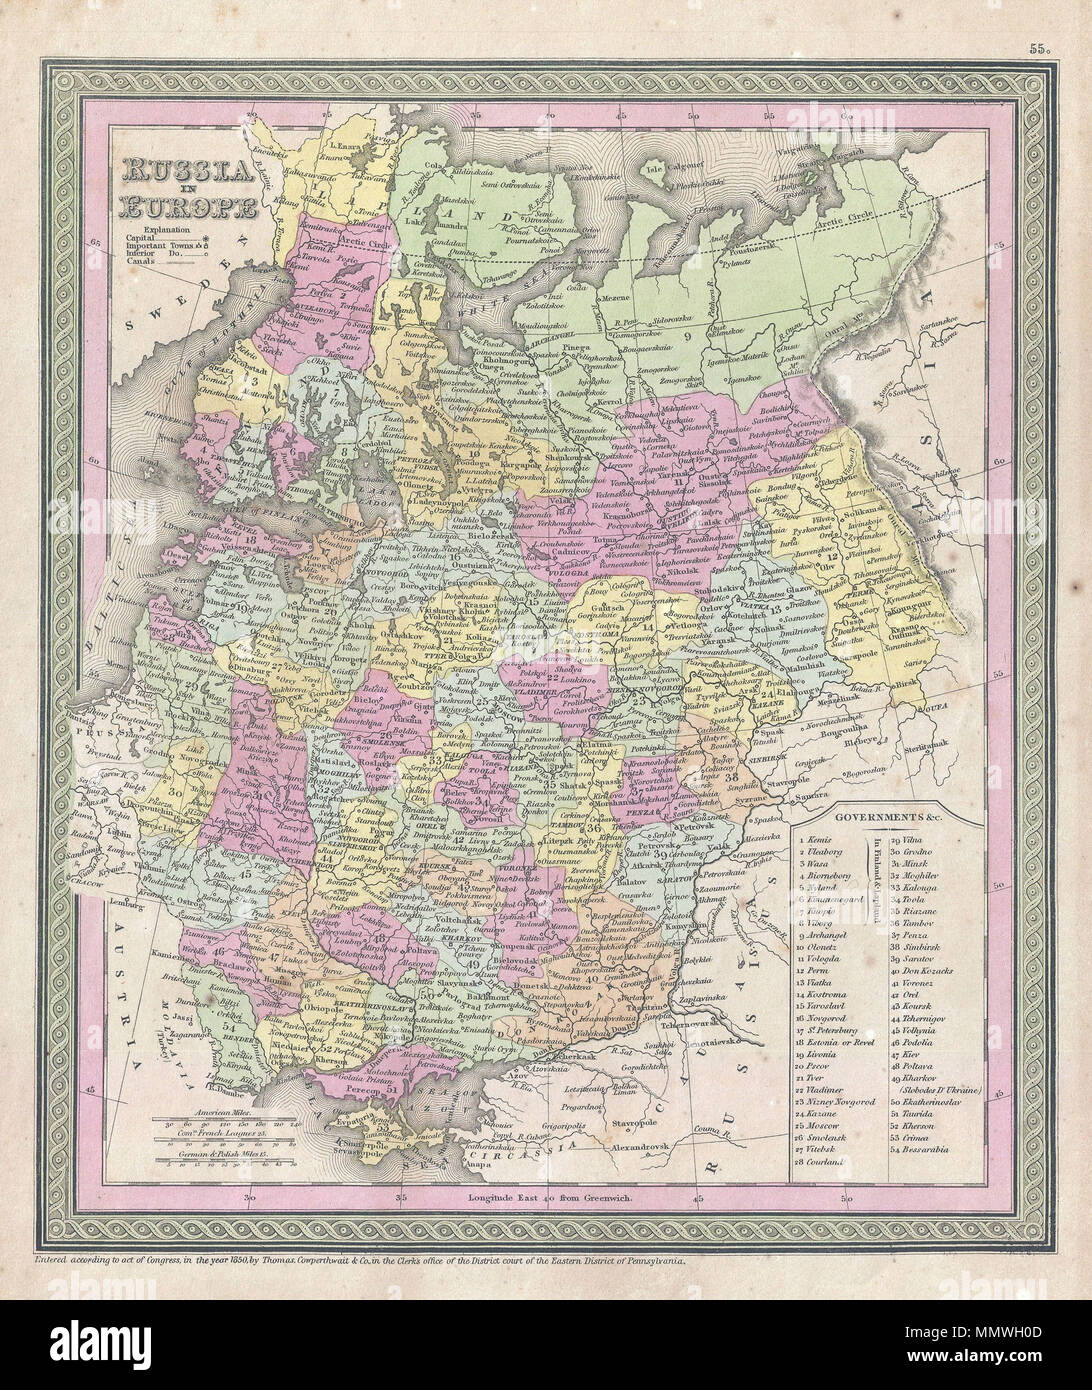 .  English: An attractive example of S. A. Mitchell Sr.’s 1853 map of the Russia in Europe. Includes the European portions of Russia as well as Finland, Ukraine, Latvia, Lithuania and Estonia. Depicts the entire country color coded according to individual regions. Surrounded by the green border common to Mitchell maps from the 1850s. Prepared by S. A. Mitchell for issued as plate no. 55 in the 1853 edition of his New Universal Atlas . Dated and copyrighted, “Entered according to act of Congress, in the year 1850, by Thomas Cowperthwait & Co., in the Clerks office of the District court of the E Stock Photo